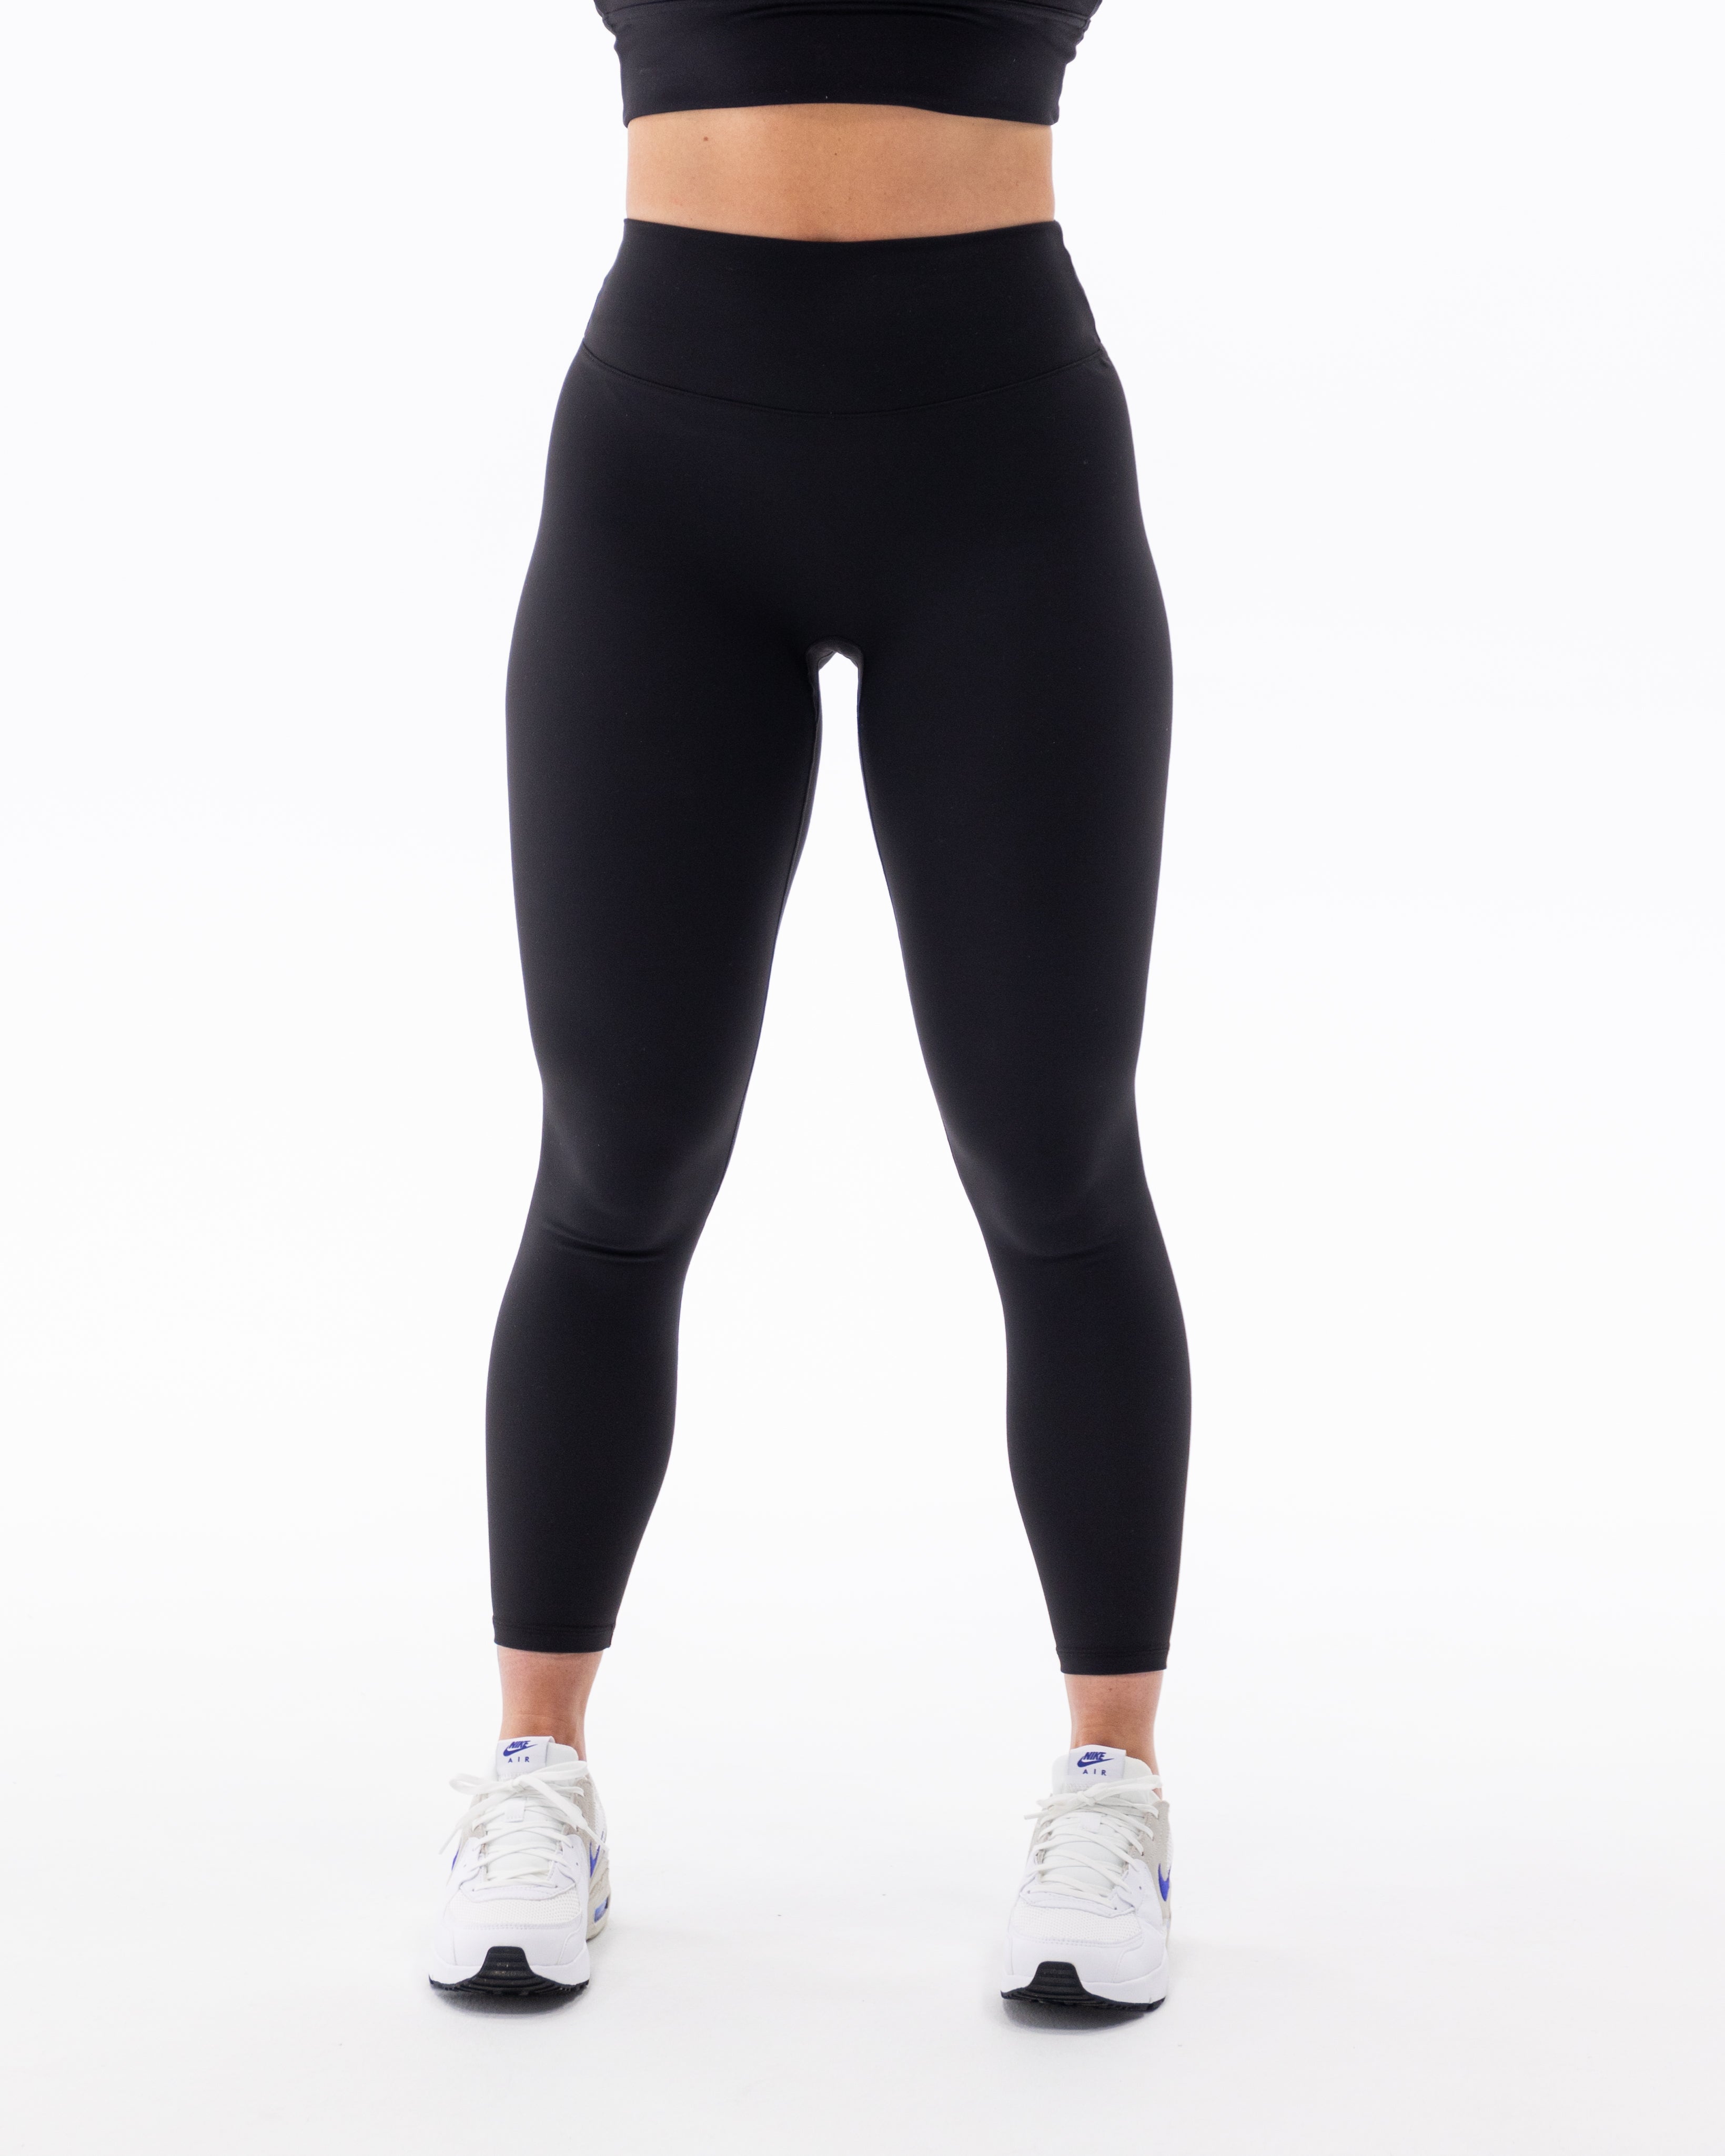 Sexy Leggings For Women MOMSQUAD Clothing